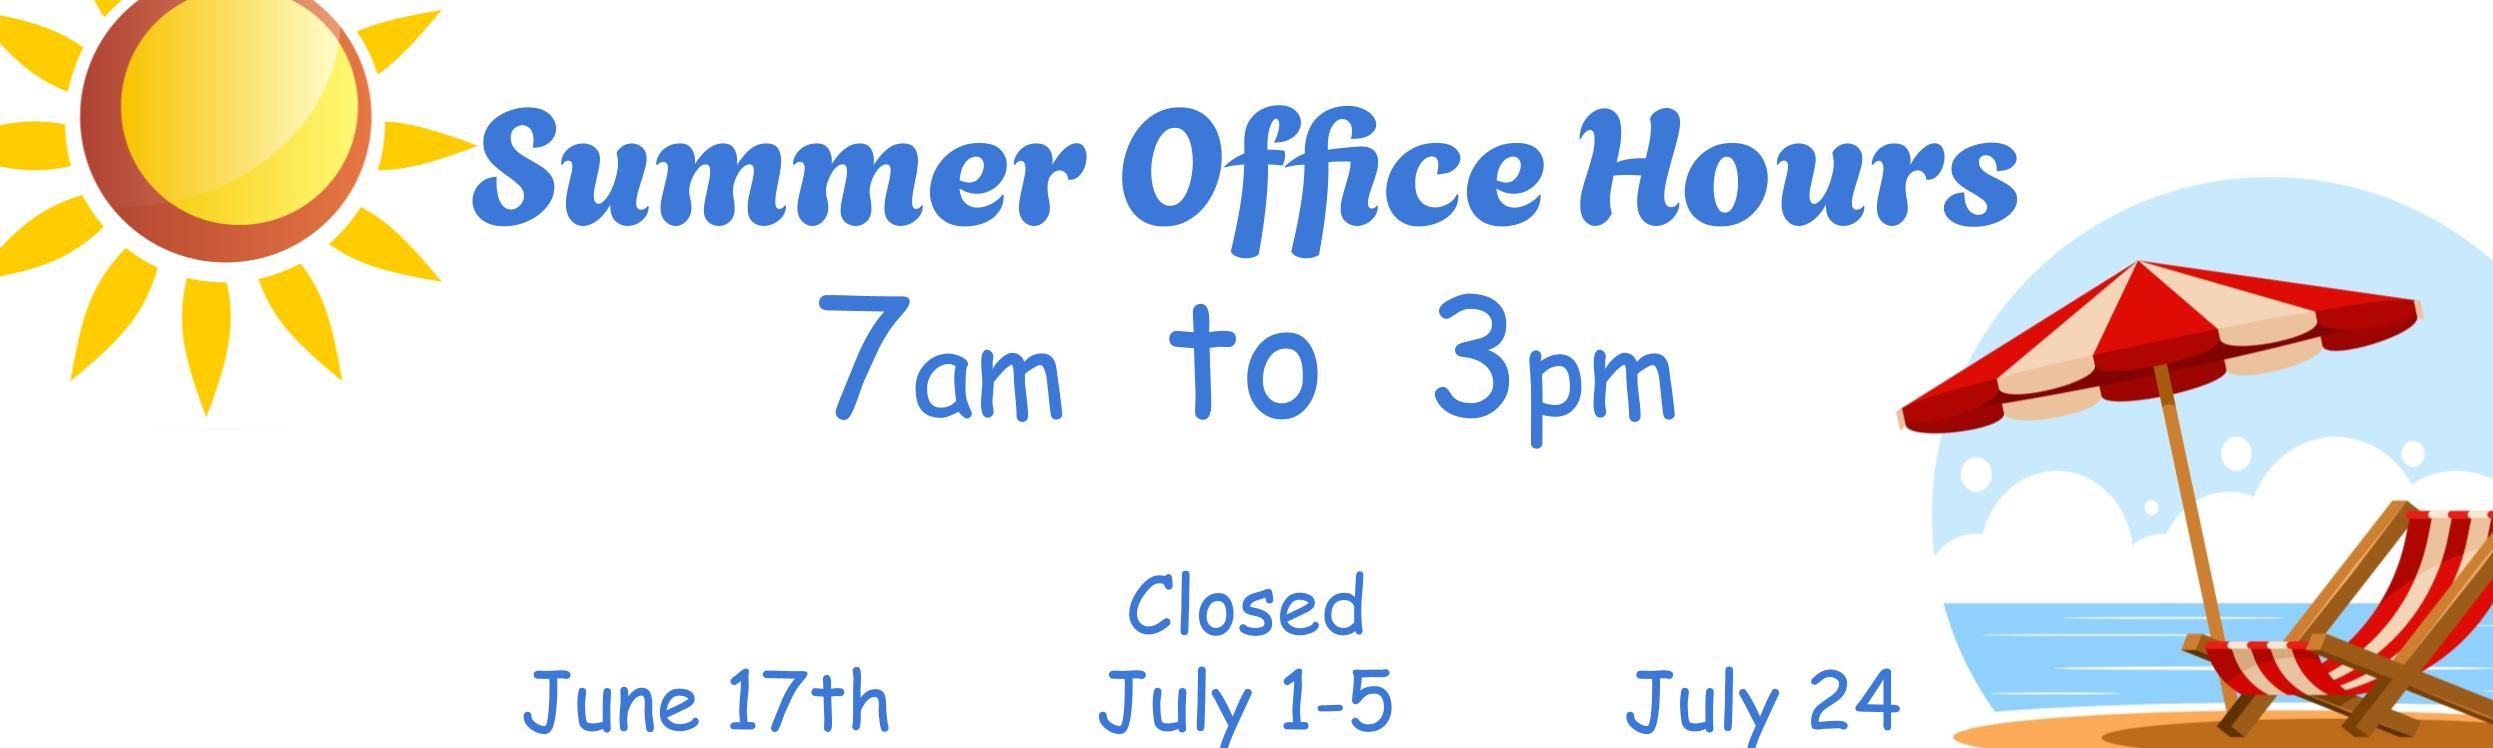 Summer Office Hours are 7 am until 3 pm. Our school will be closed the following dates: June 17th, July 1st to the 5th, and July 24th